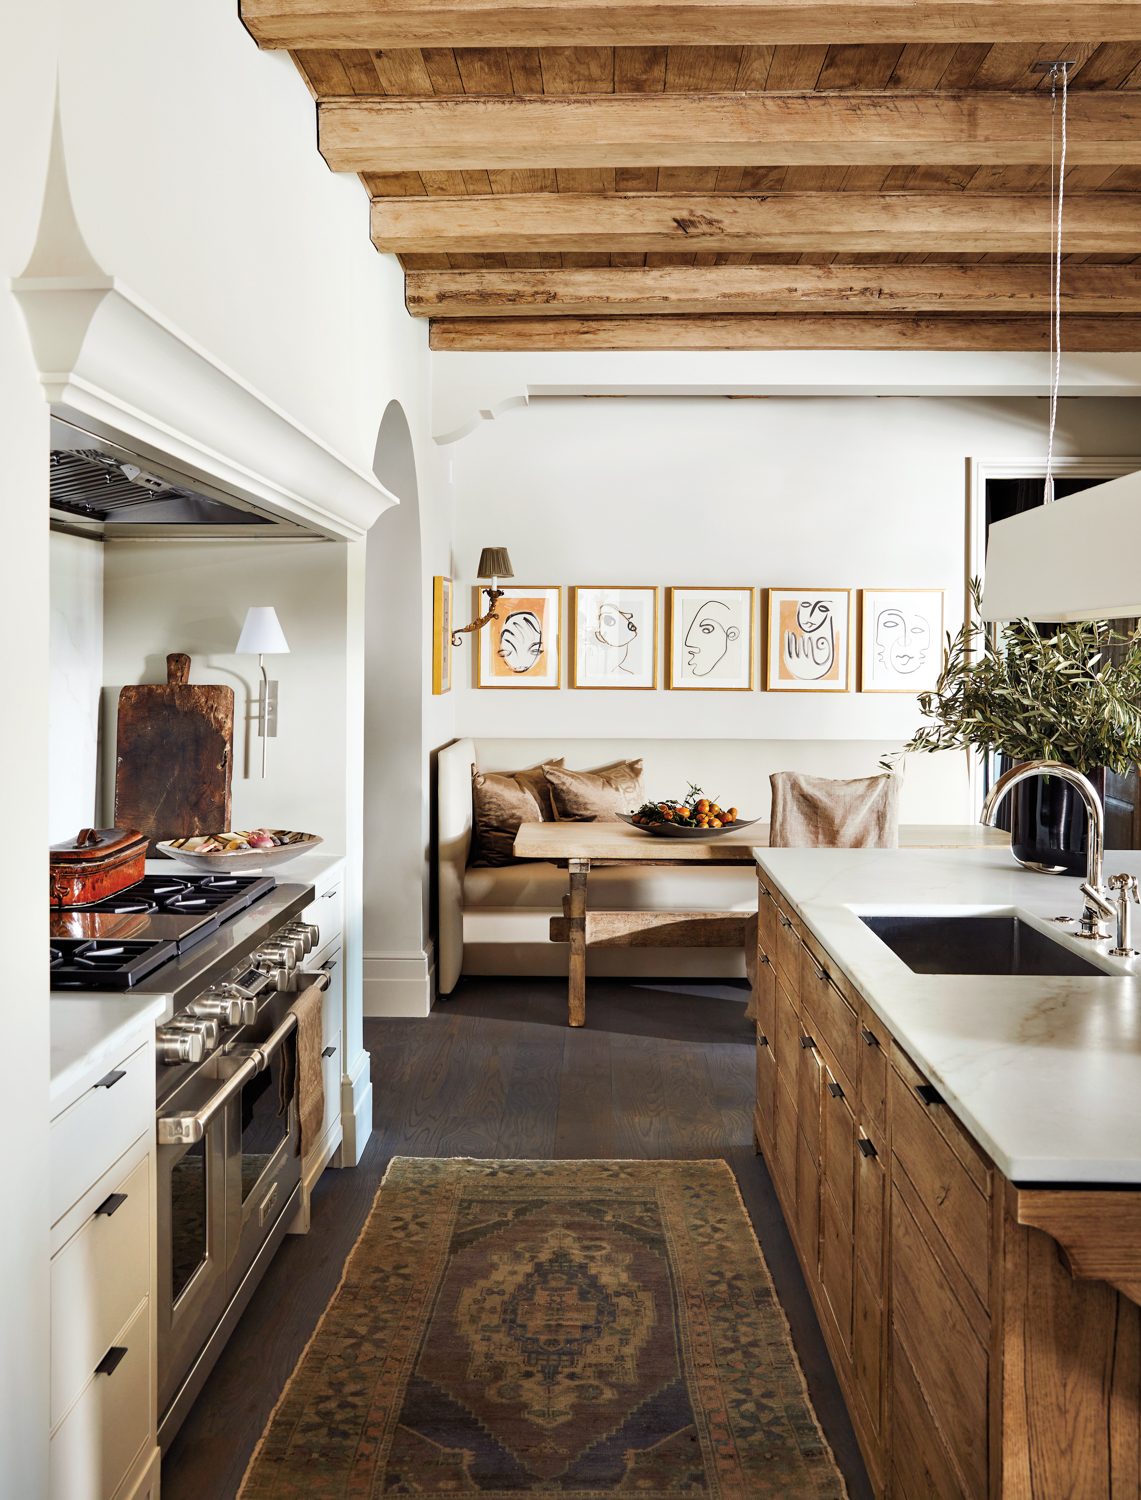 Kitchen with reclaimed wood textures, banquette seating, an antique rug and abstract artwork